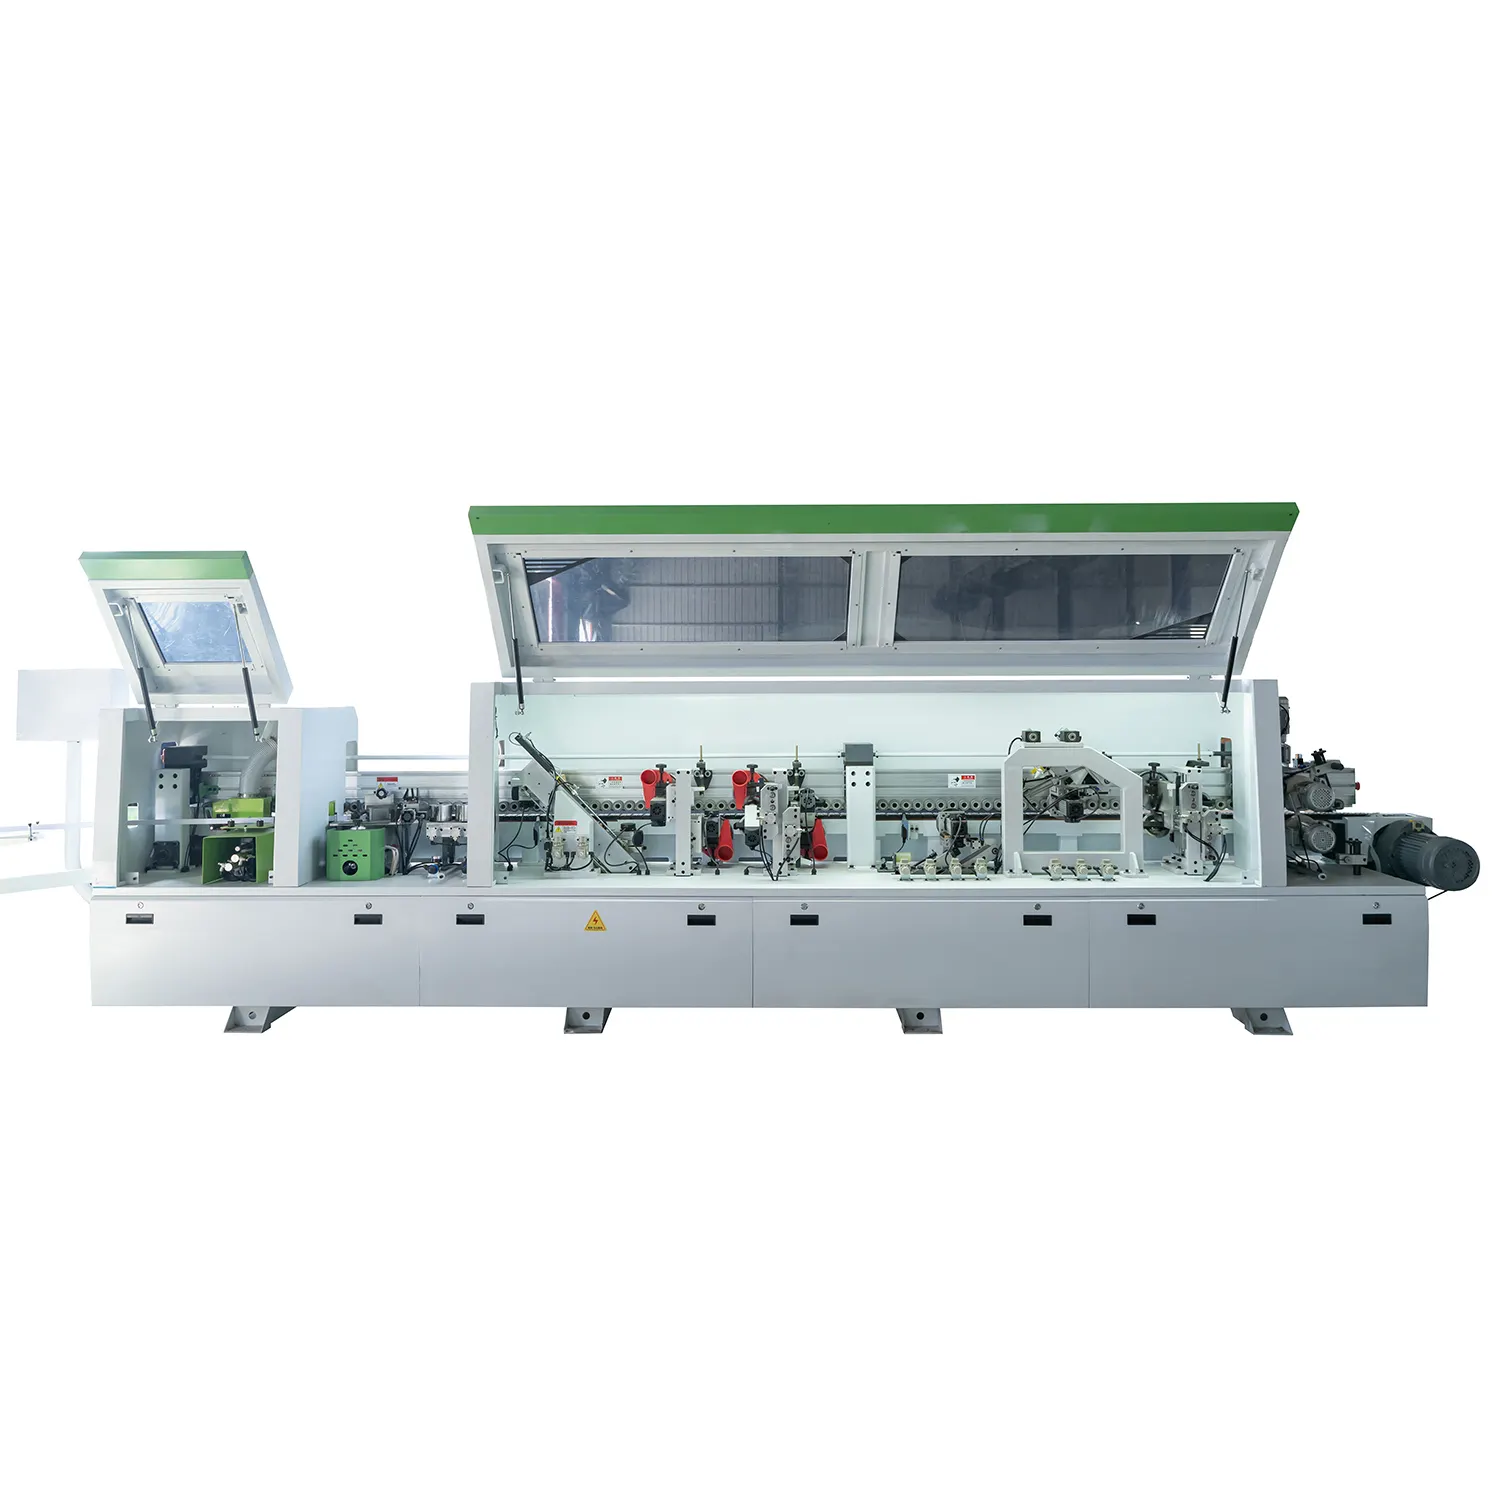 CNC PVC Wood MDF Melamine Edge Bander Other Woodworking Machinery Automatic Edge Banding Bander Trimmer Machine with Pre-milling